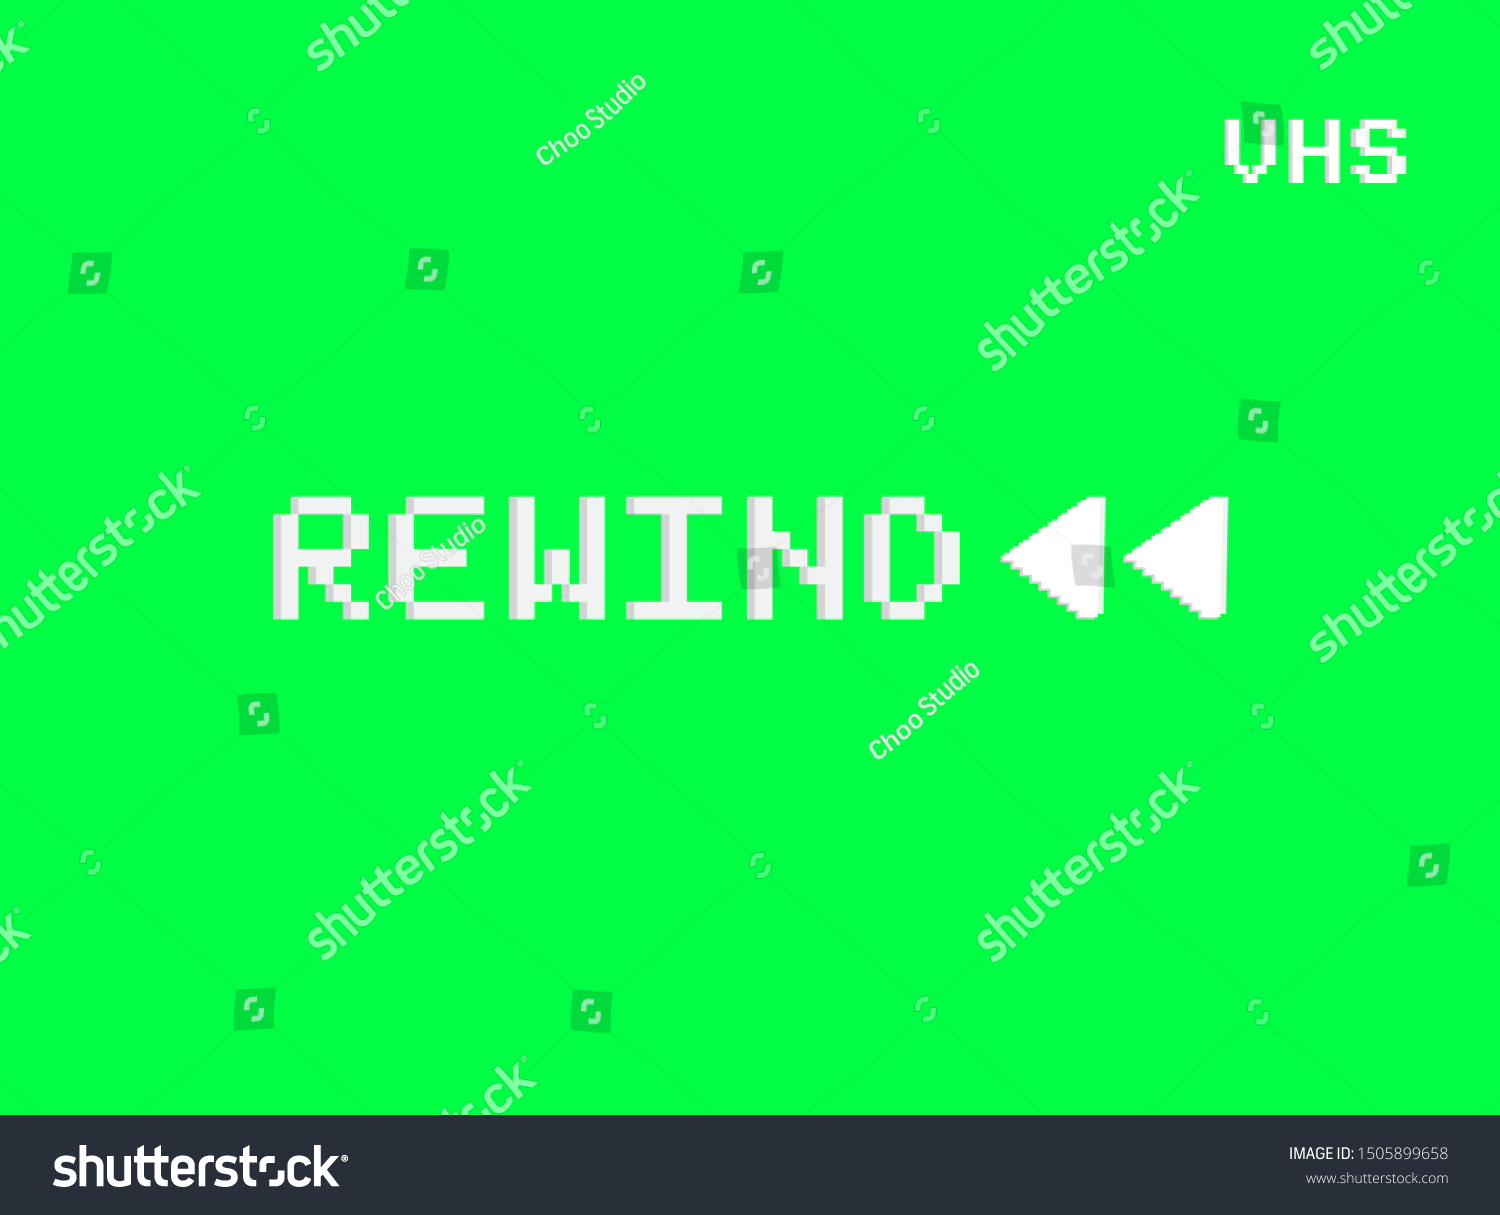 SVG of Rewind VHS screen of a videotape player. Retro 80s style vintage television video recorder pixel art background. Green screen chromakey vector svg